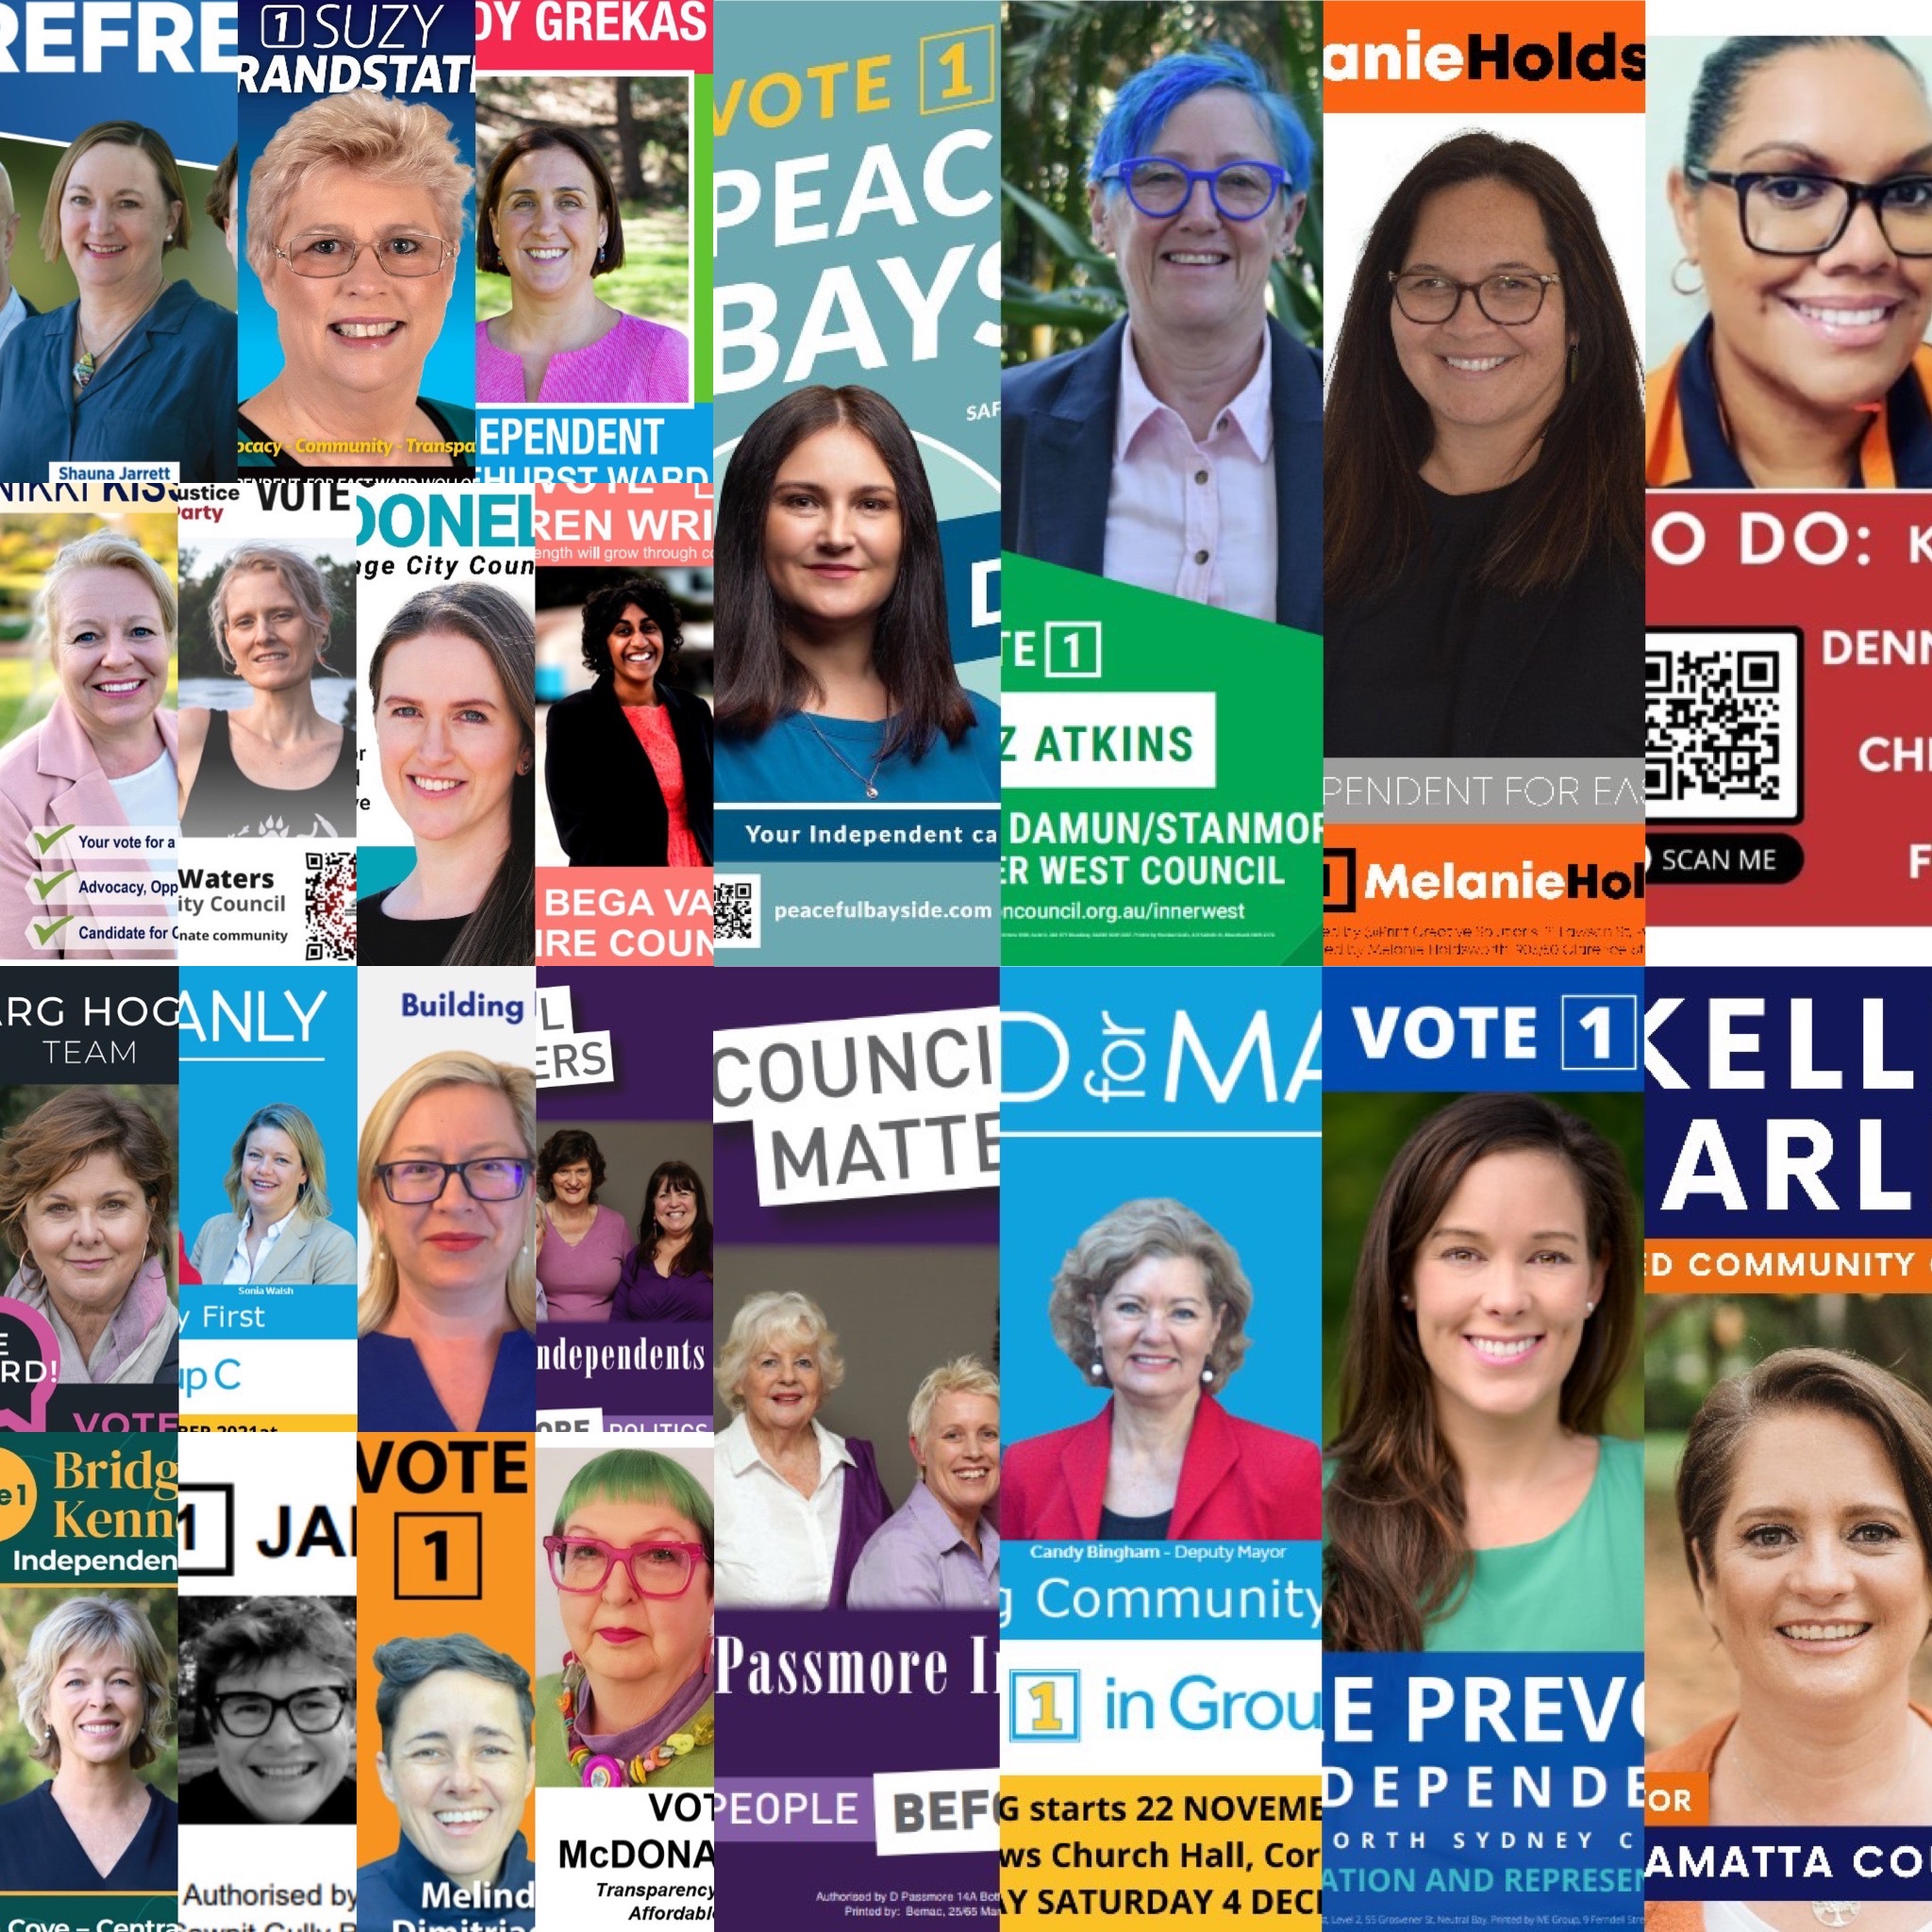 A composite image with photos of women seeking election